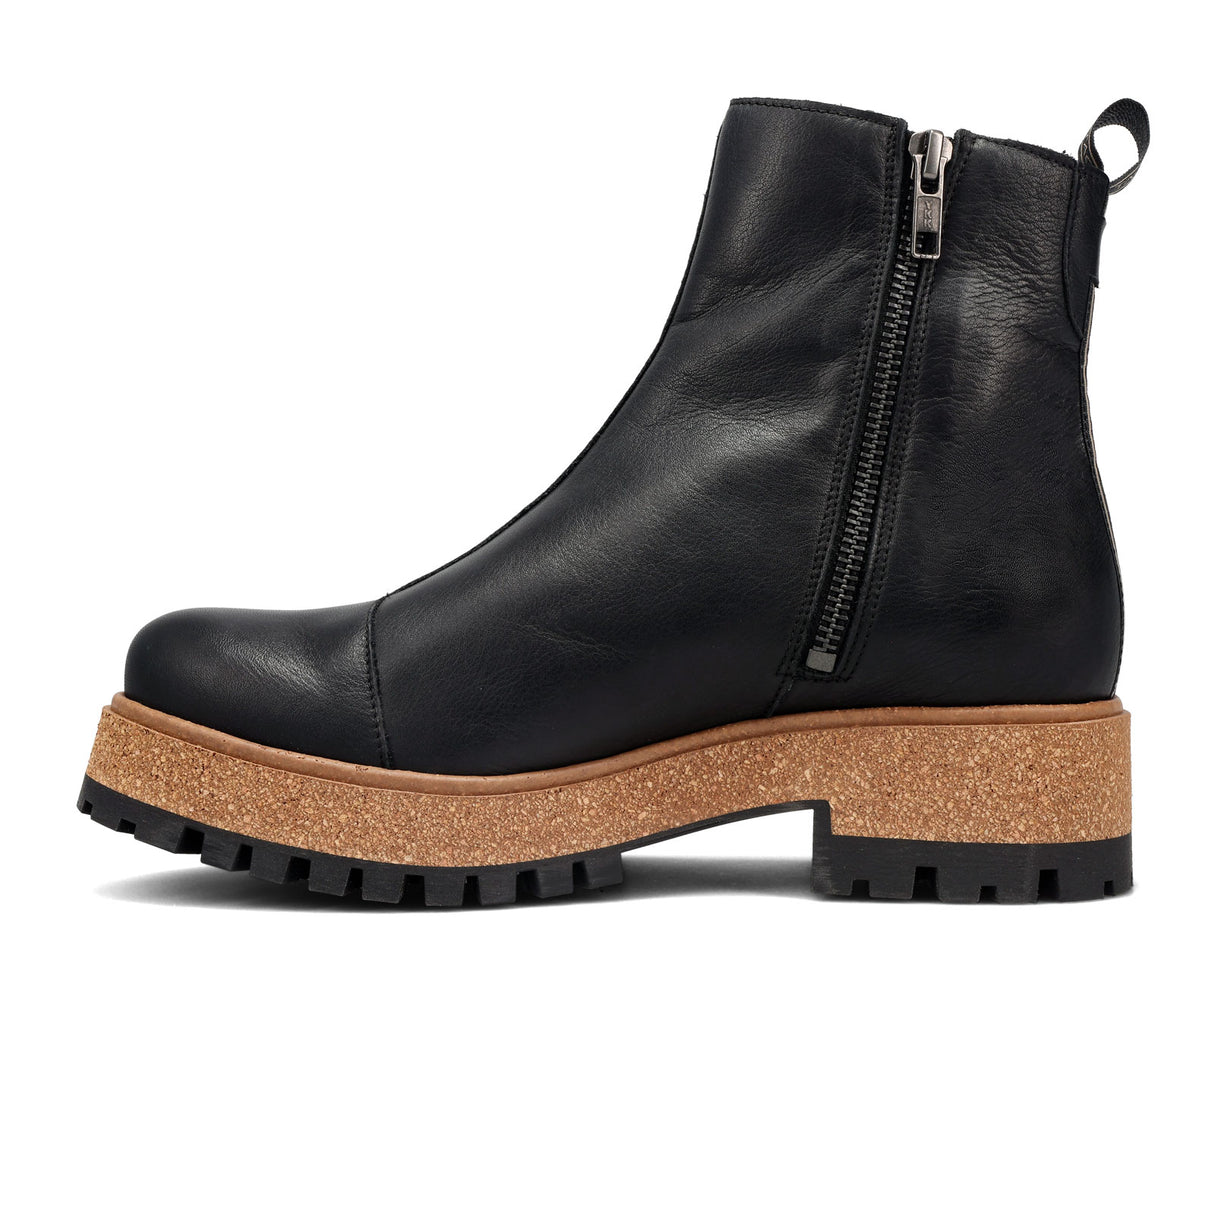 Taos Downtown Mid Boot (Women) - Black Boots - Casual - Mid - The Heel Shoe Fitters